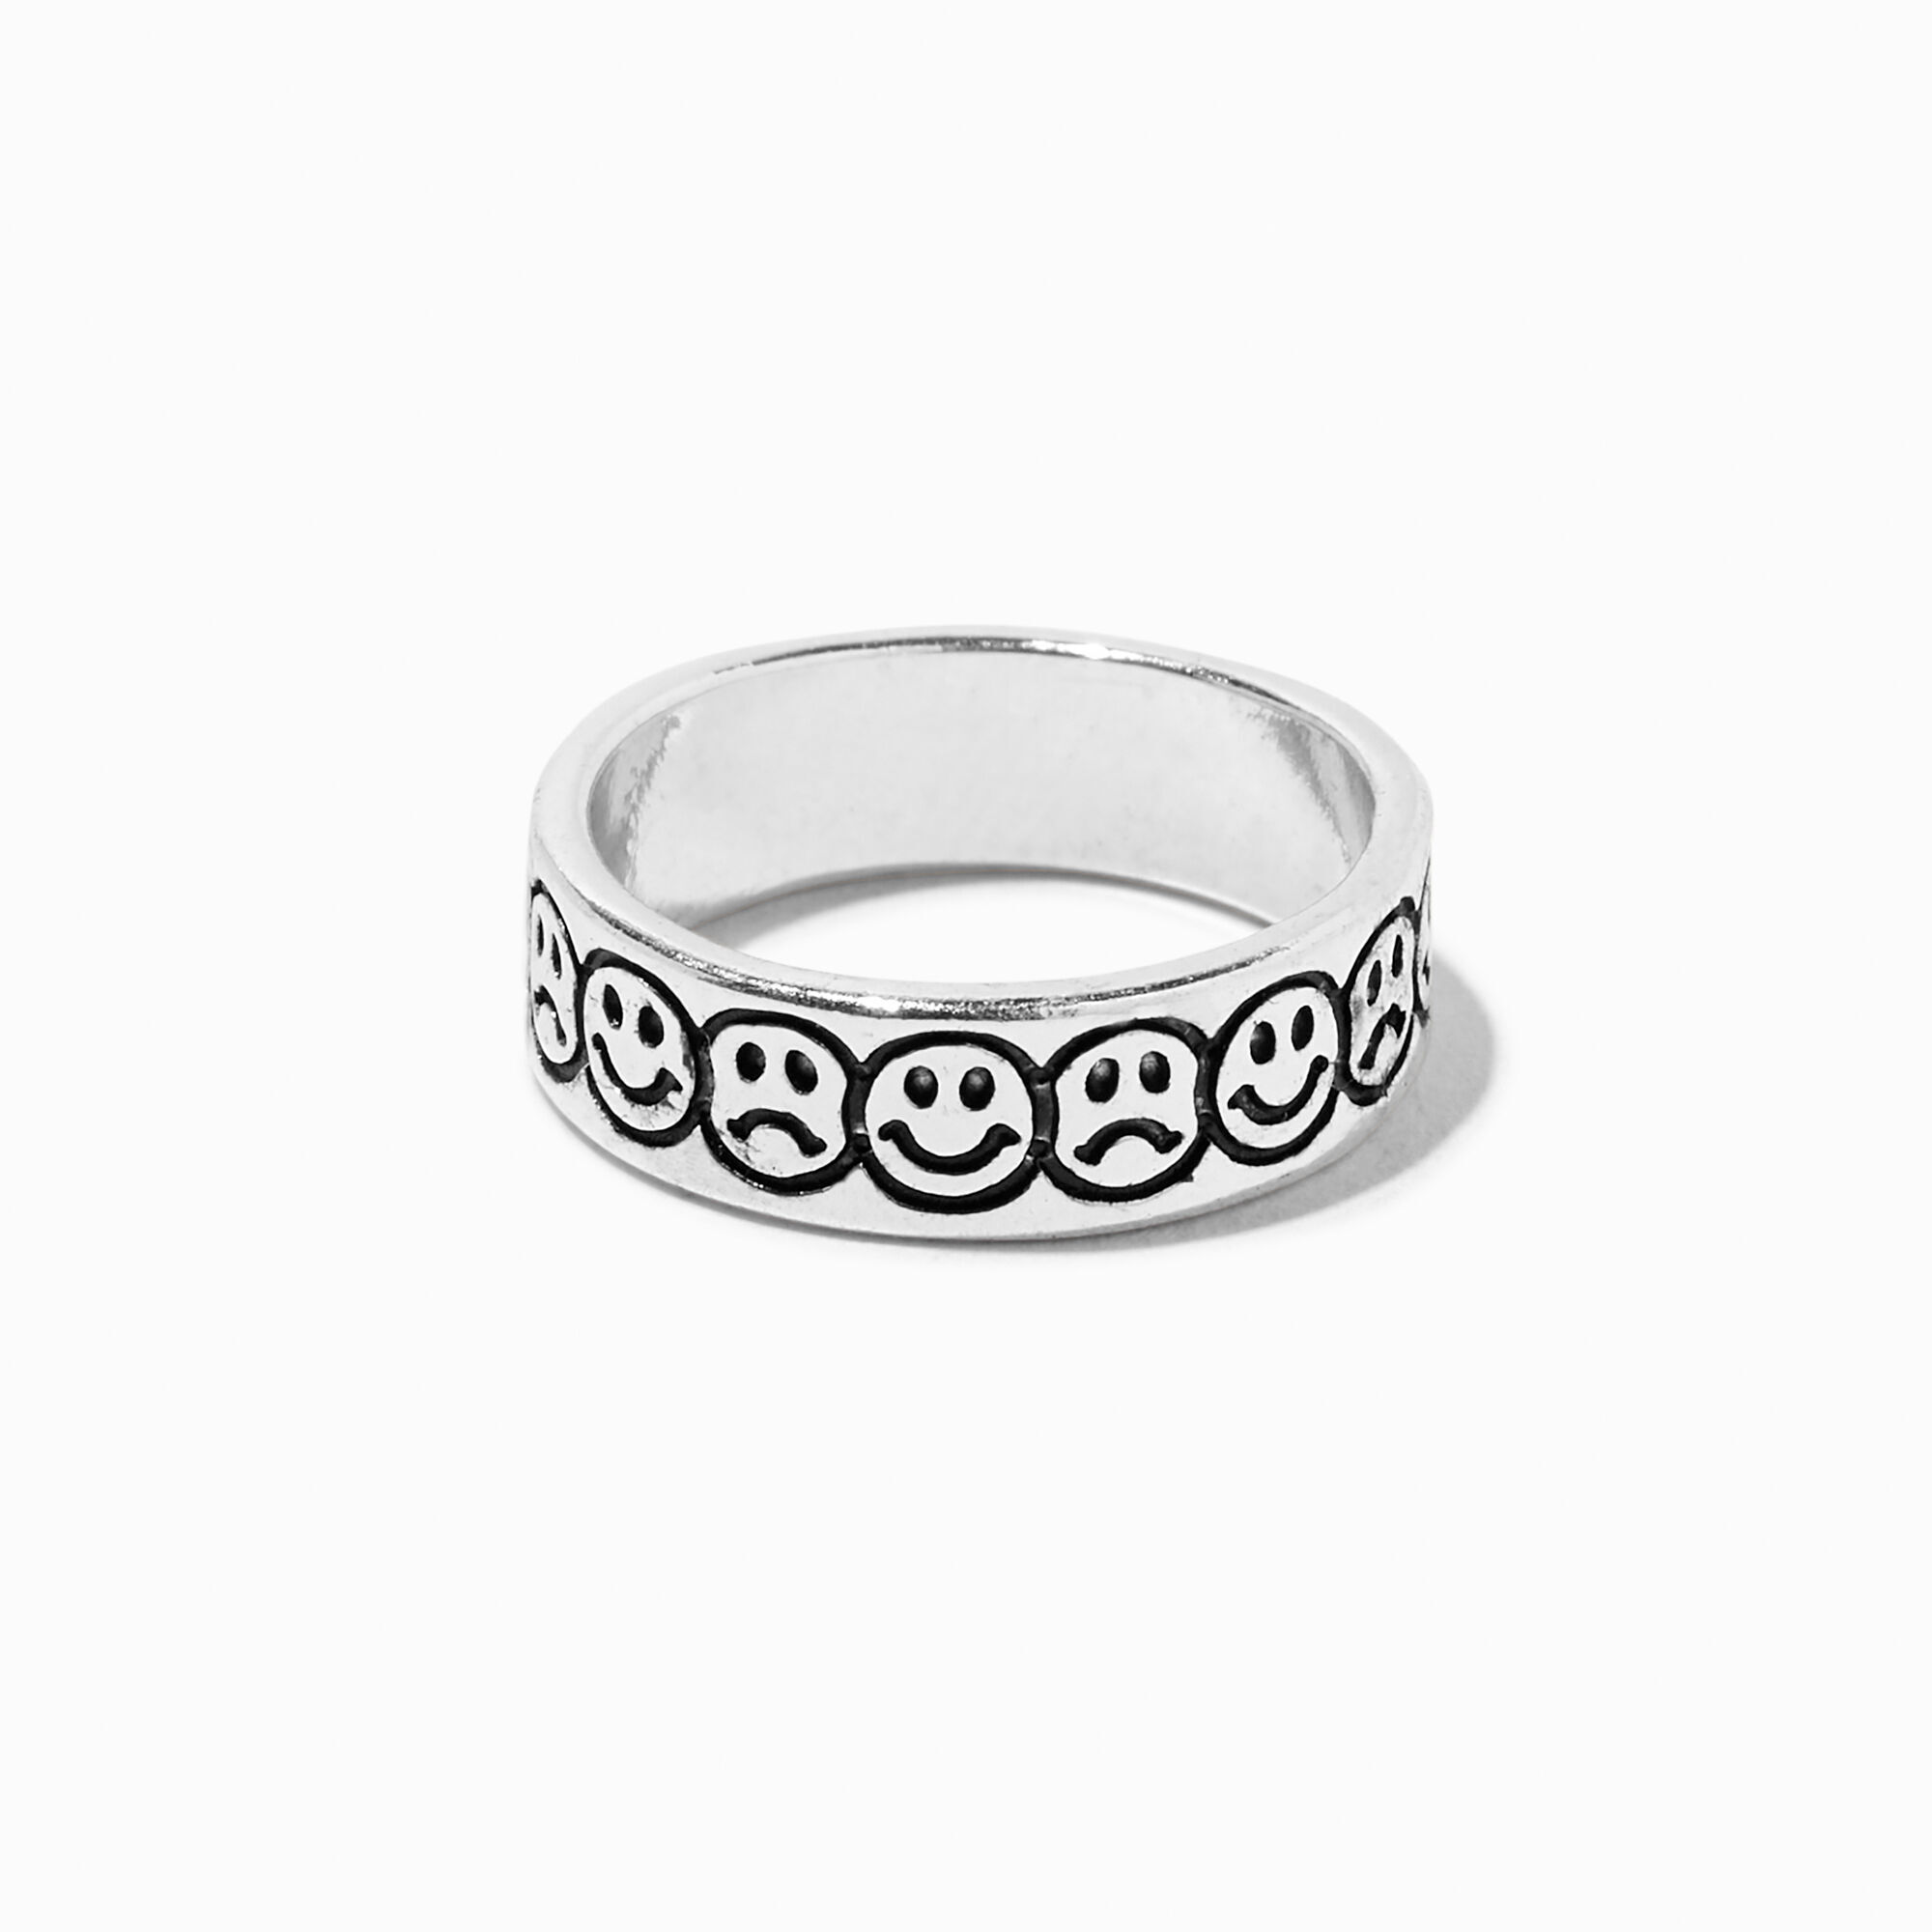 View Claires Happy Sad Face Band Ring Silver information